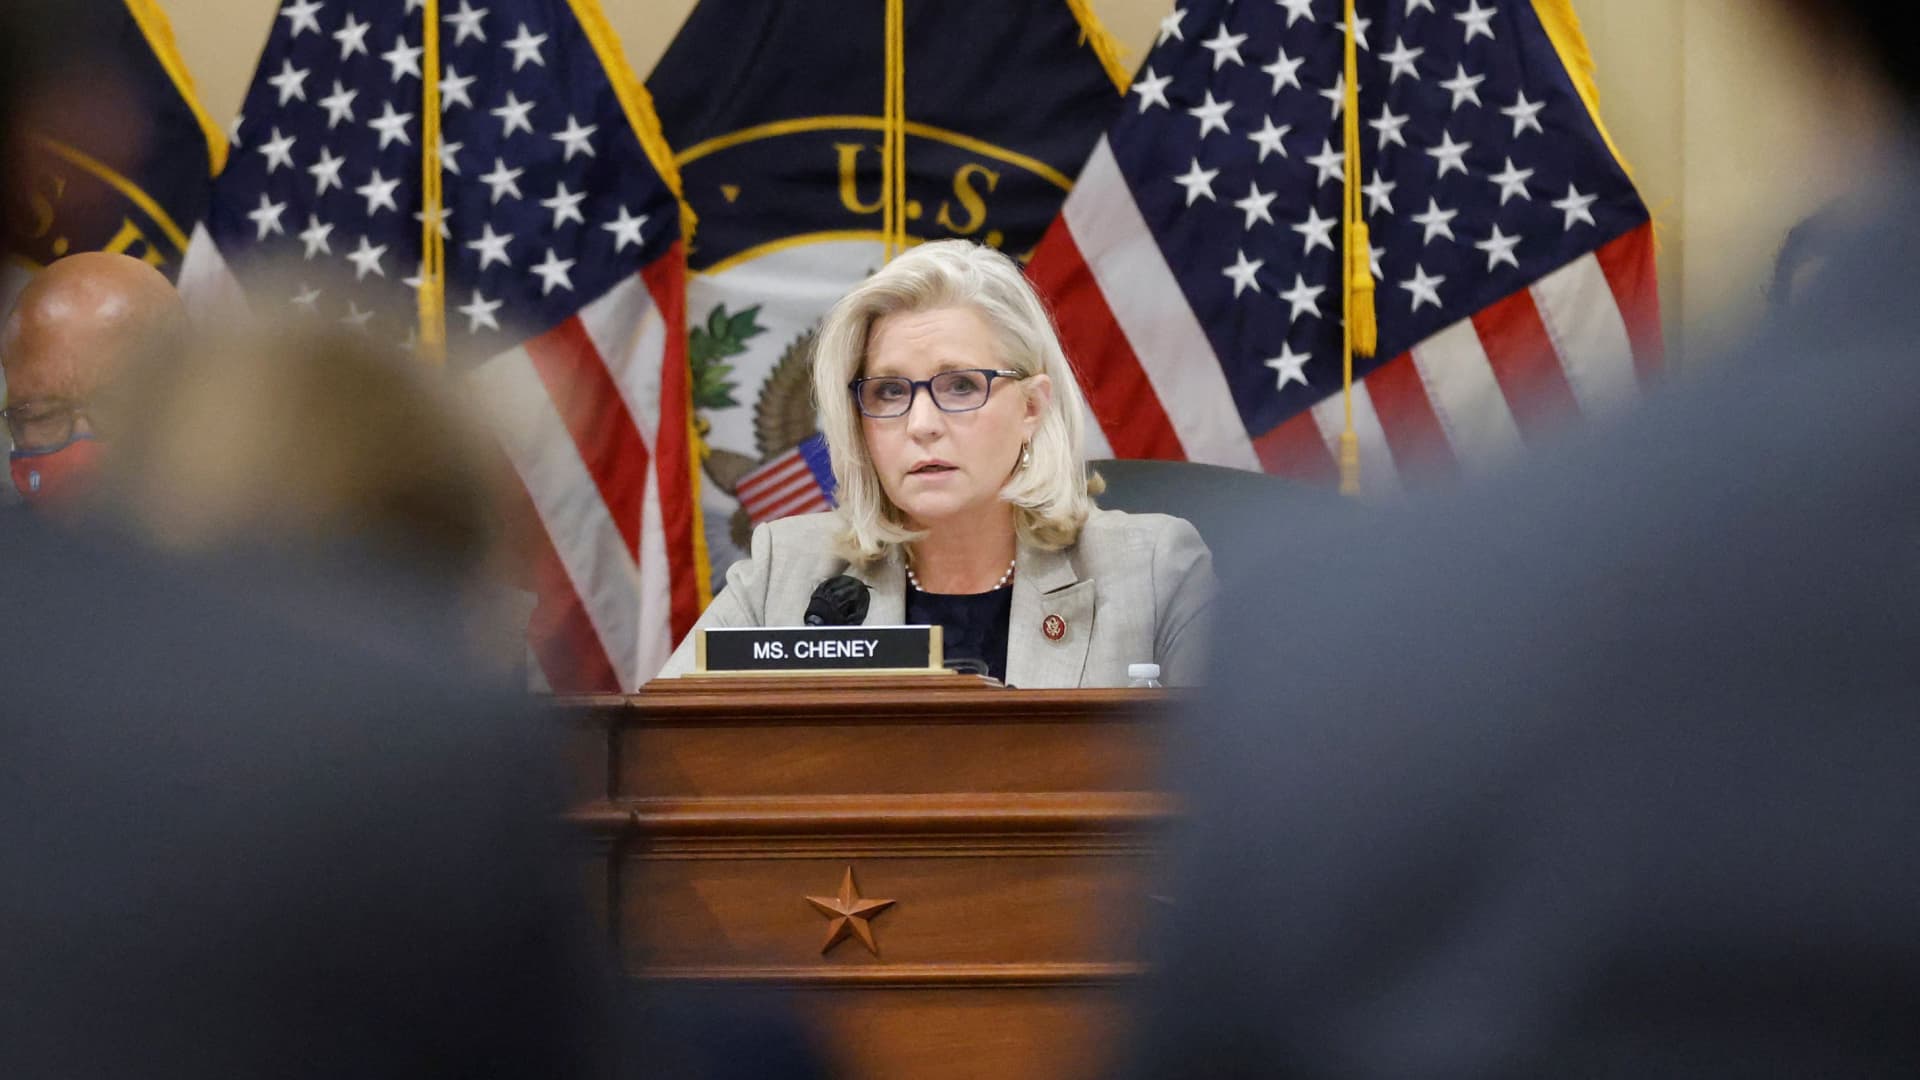 U.S. House Select Committee on Jan. 6th Vice-Chair Representative Liz Cheney (R-WY) delivers remarks as members meet to vote on whether Mark Meadows, who served as former President Donald Trump's chief of staff, should be cited for contempt of Congress on Capitol Hill in Washington, U.S. December 13, 2021.